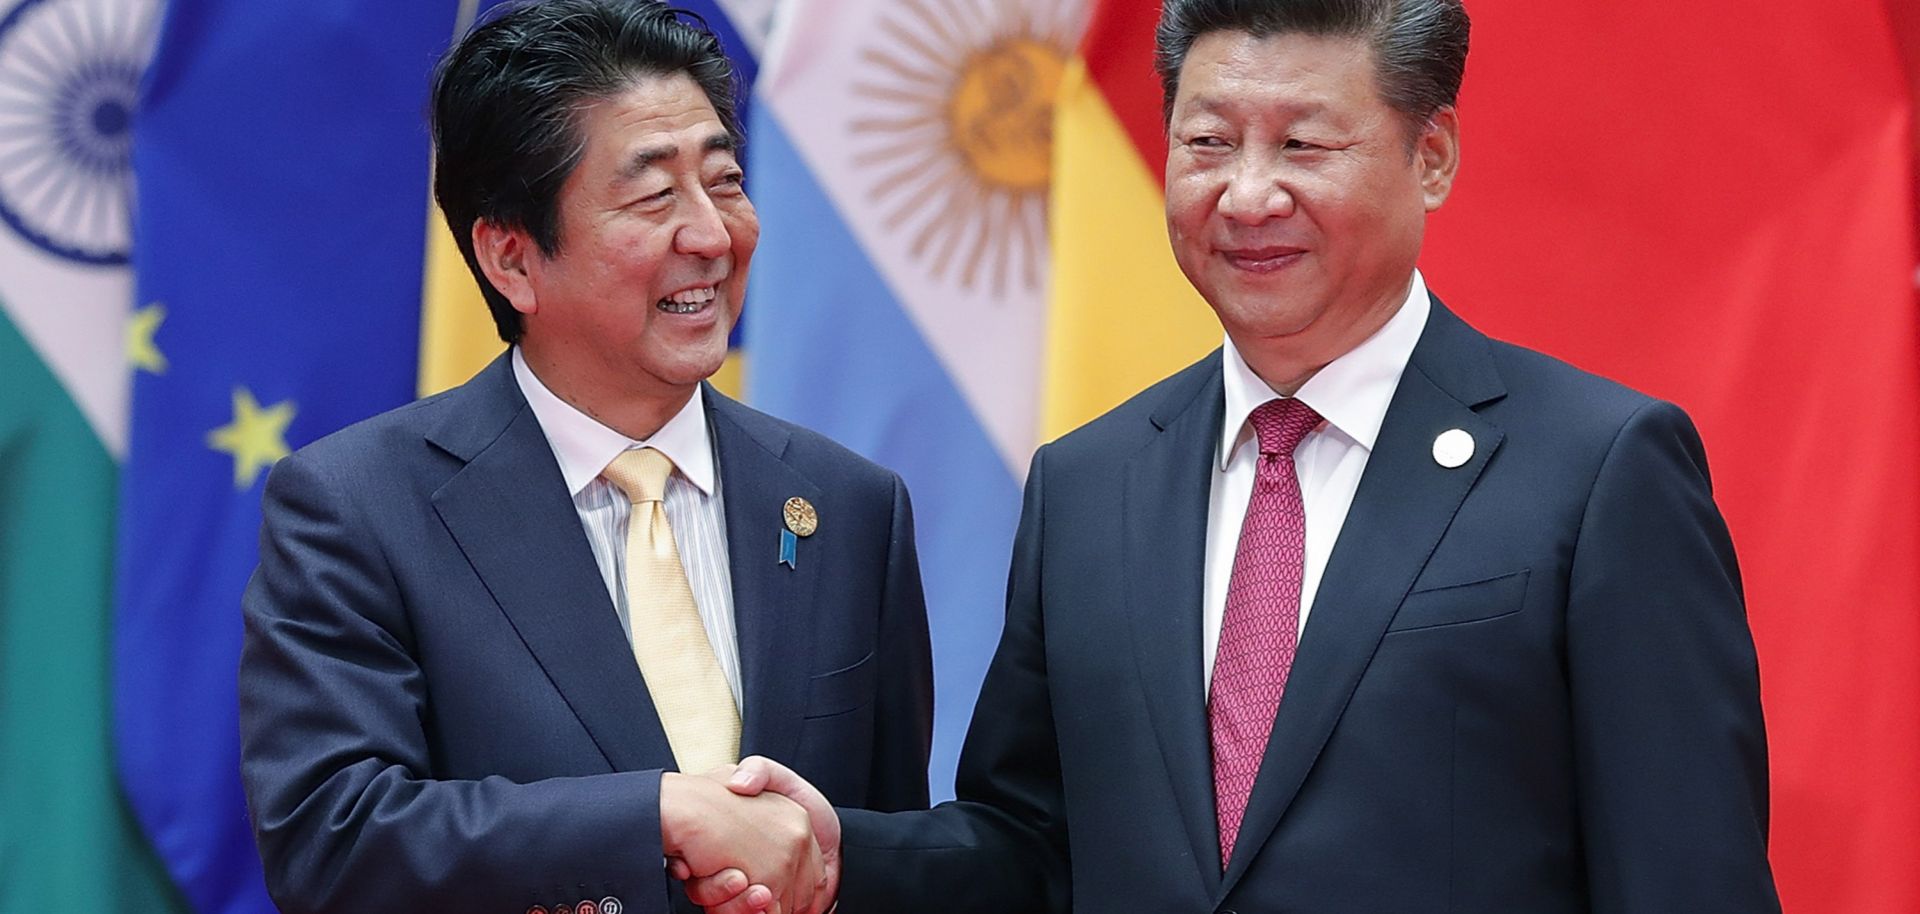 Japanese Prime Minister Shinzo Abe (L) and Chinese President Xi Jinping shake hands at the 2016 G-20 Summit.